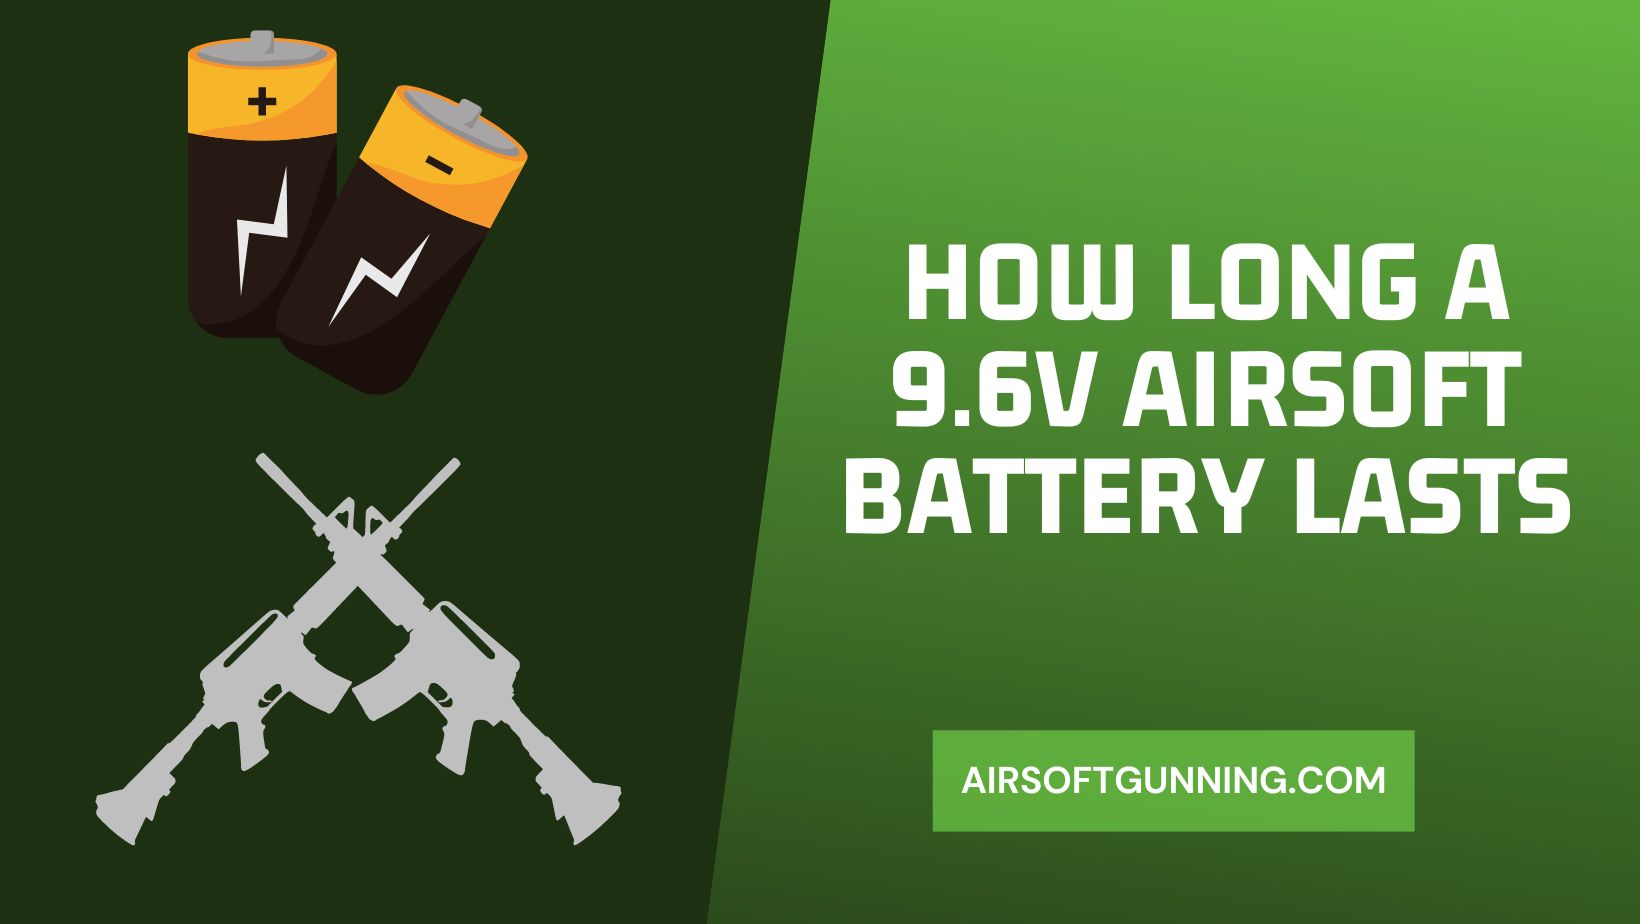 How Long a 9.6v Airsoft Battery Lasts